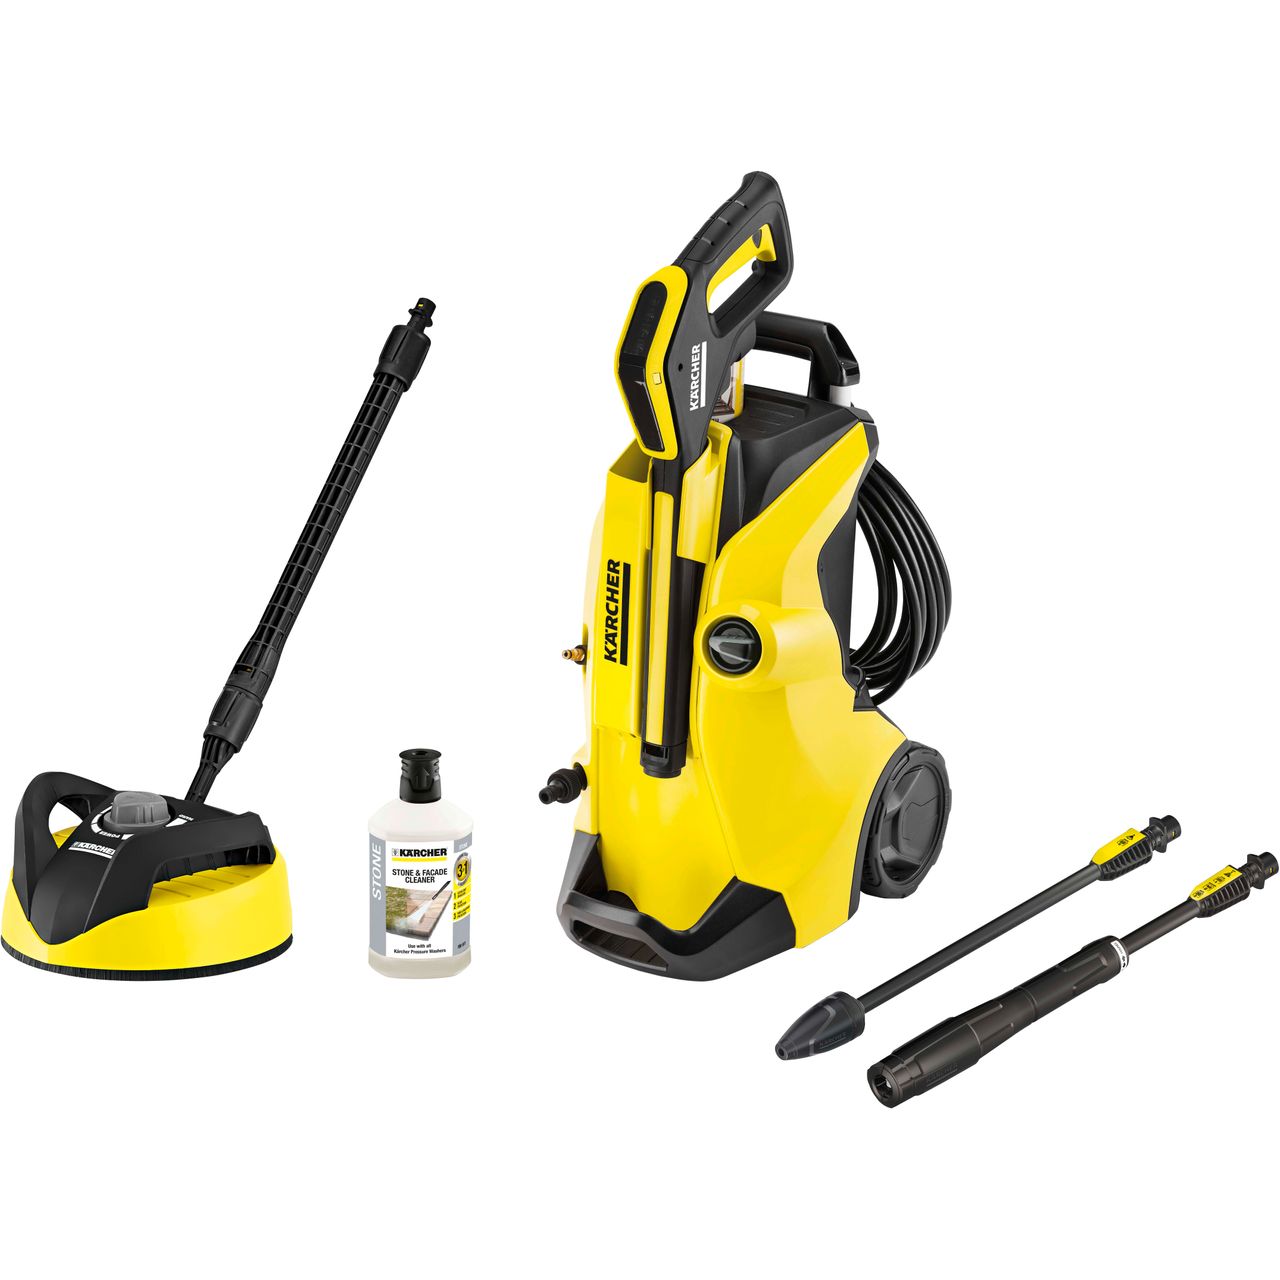 Karcher K4 Full Control Home Pressure Washer Review